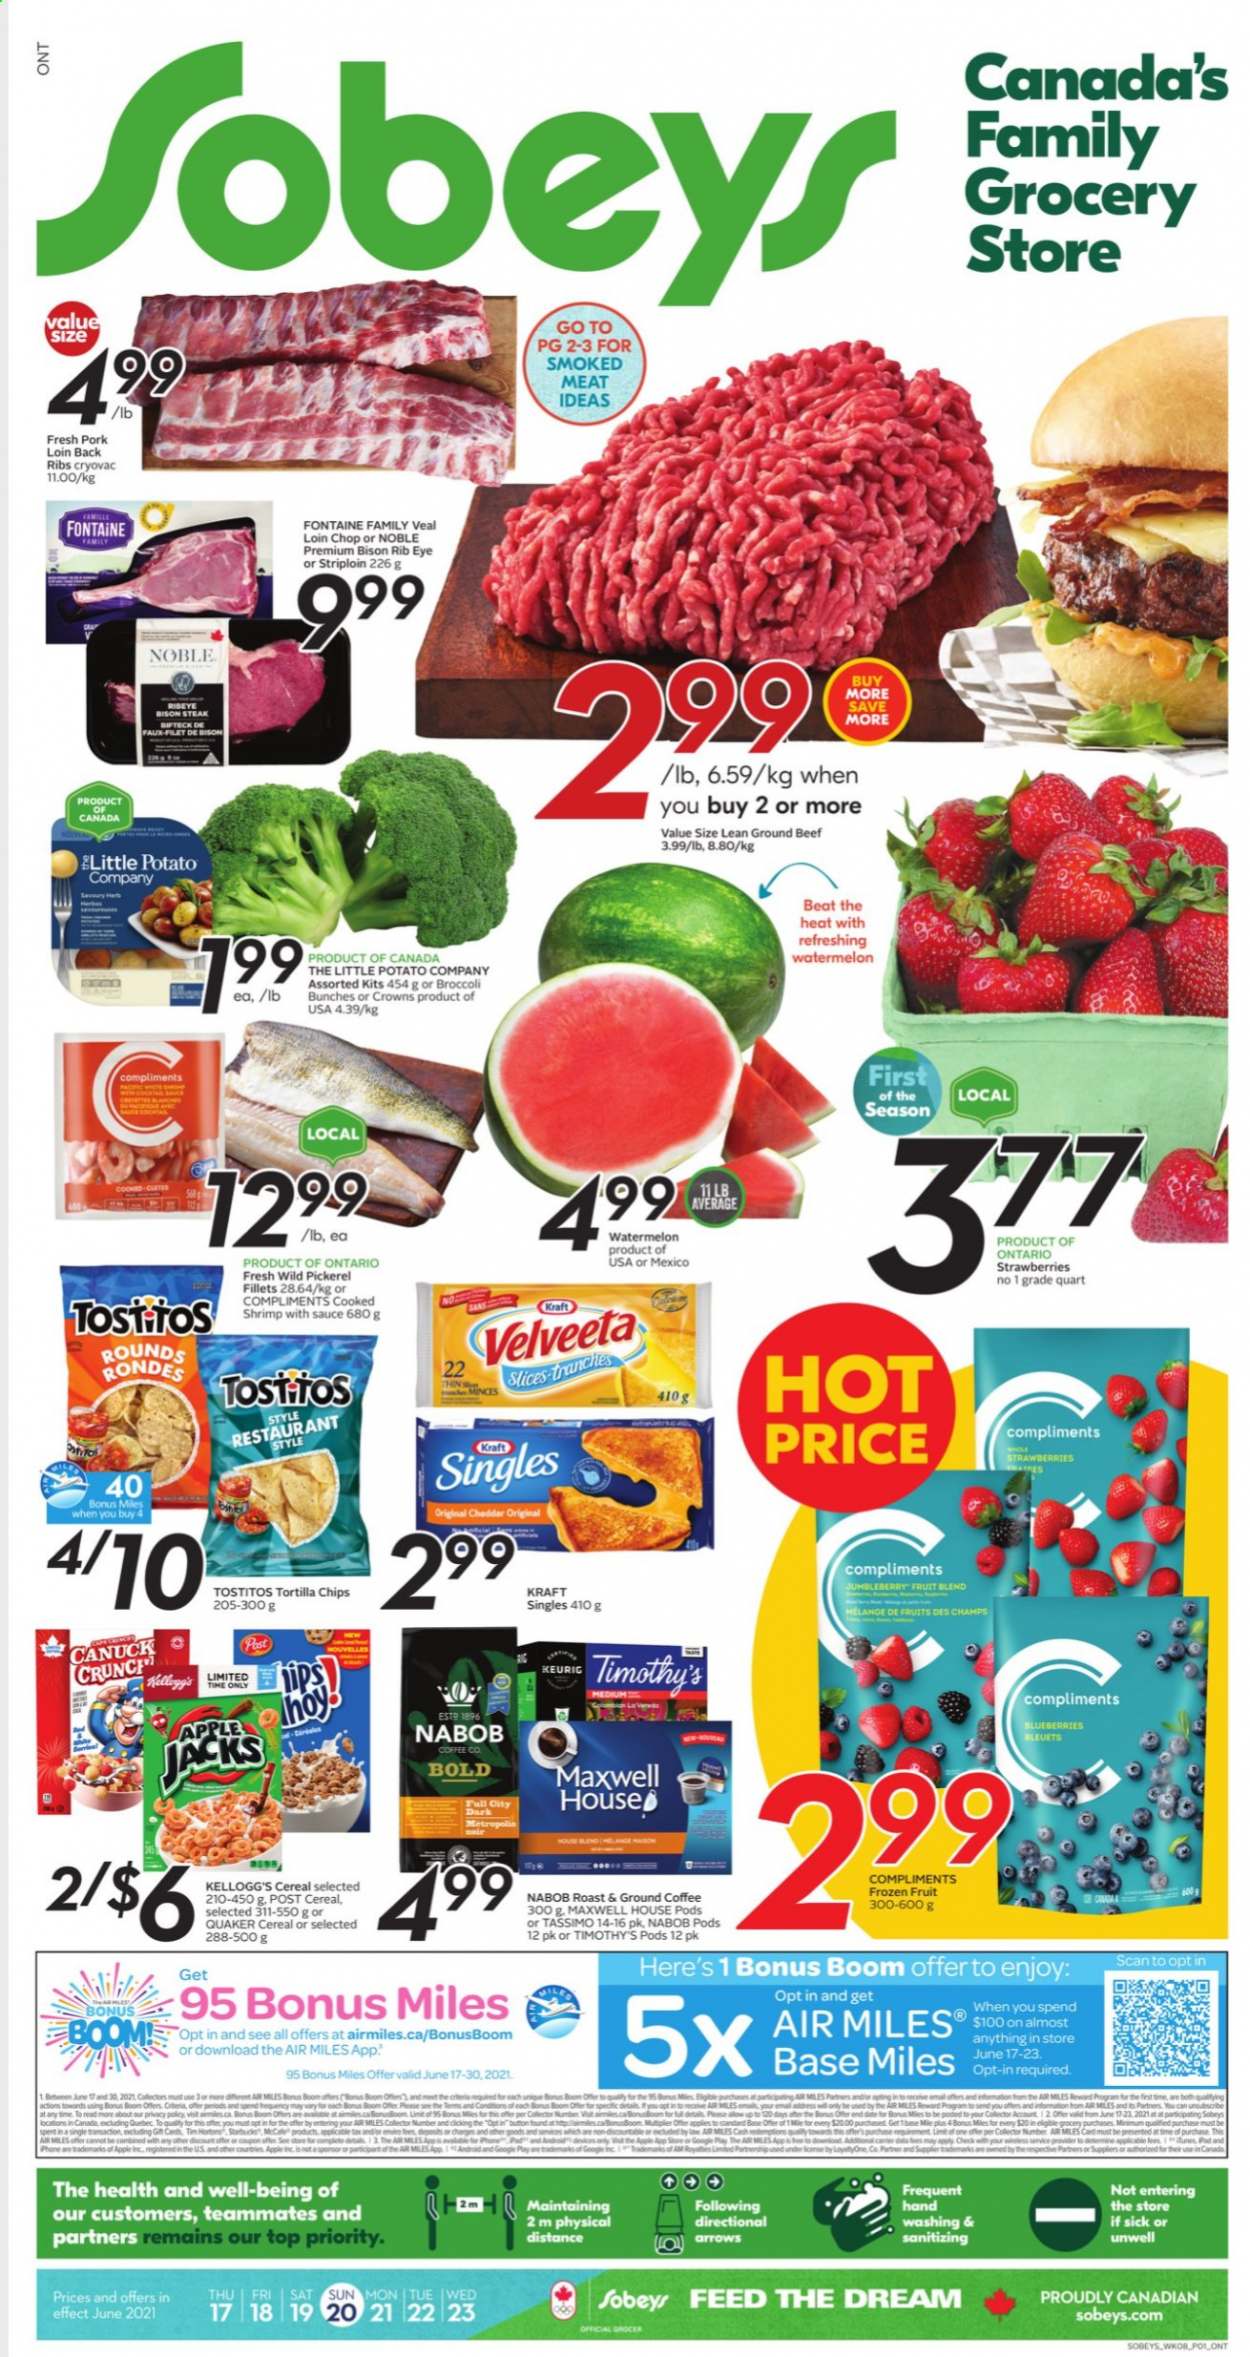 thumbnail - Sobeys Flyer - June 17, 2021 - June 23, 2021 - Sales products - broccoli, blueberries, strawberries, watermelon, shrimps, walleye, Quaker, Kraft®, sandwich slices, cheese, Kraft Singles, Kellogg's, tortilla chips, Tostitos, cereals, Maxwell House, coffee, ground coffee, beef meat, ground beef, bison meat, pork loin, pork meat, steak. Page 1.